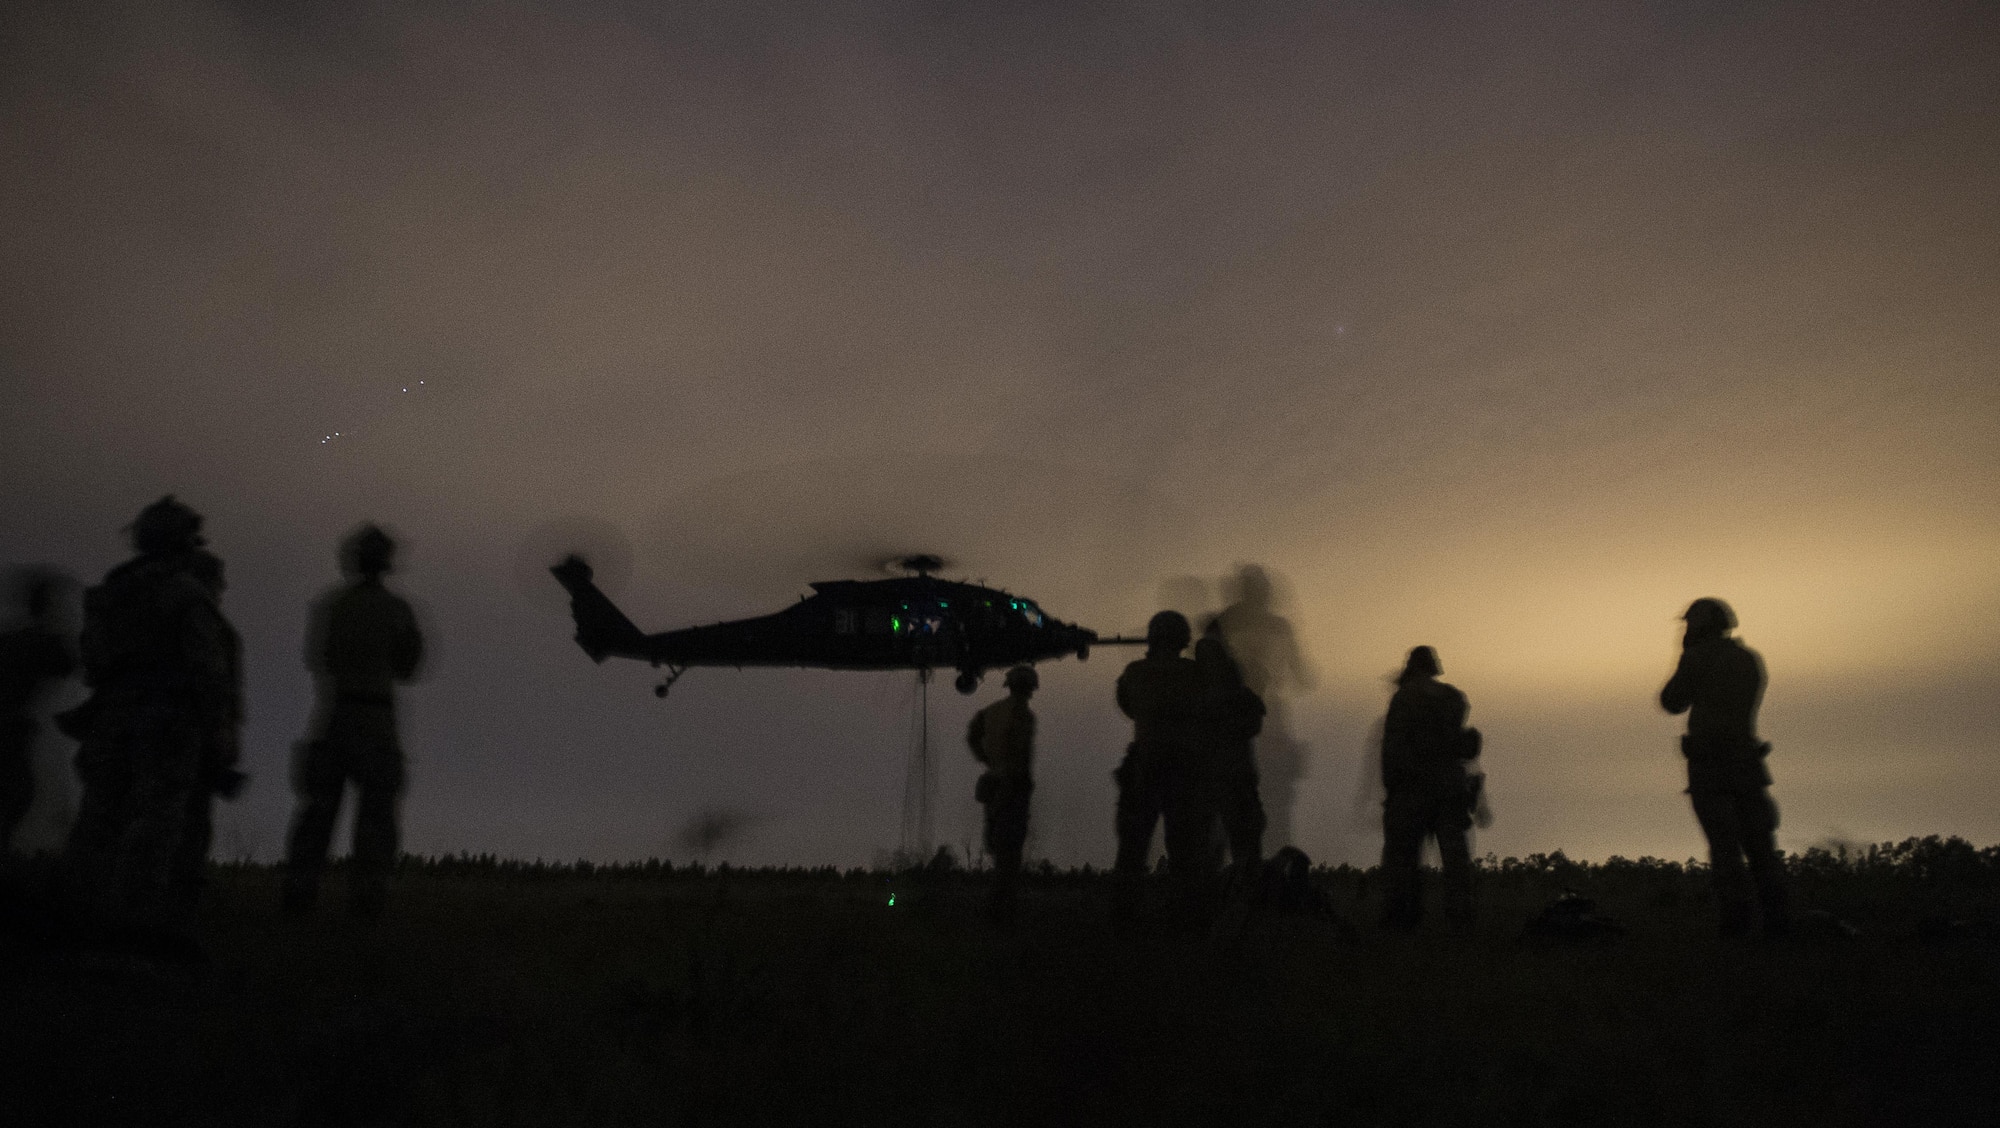 U.S. Army Soldiers from the 7th Special Forces Group fast-rope out of a UH-60 Black Hawk during fast rope insertion and extraction training as part of Emerald Warrior at Hurlburt Field, Fla., April 22, 2015. Emerald Warrior is the Department of Defense's only irregular warfare exercise, allowing joint and combined partners to train together and prepare for real-world contingency operations. (U.S. Air Force photo by Staff Sgt. Kenneth W. Norman/Released)